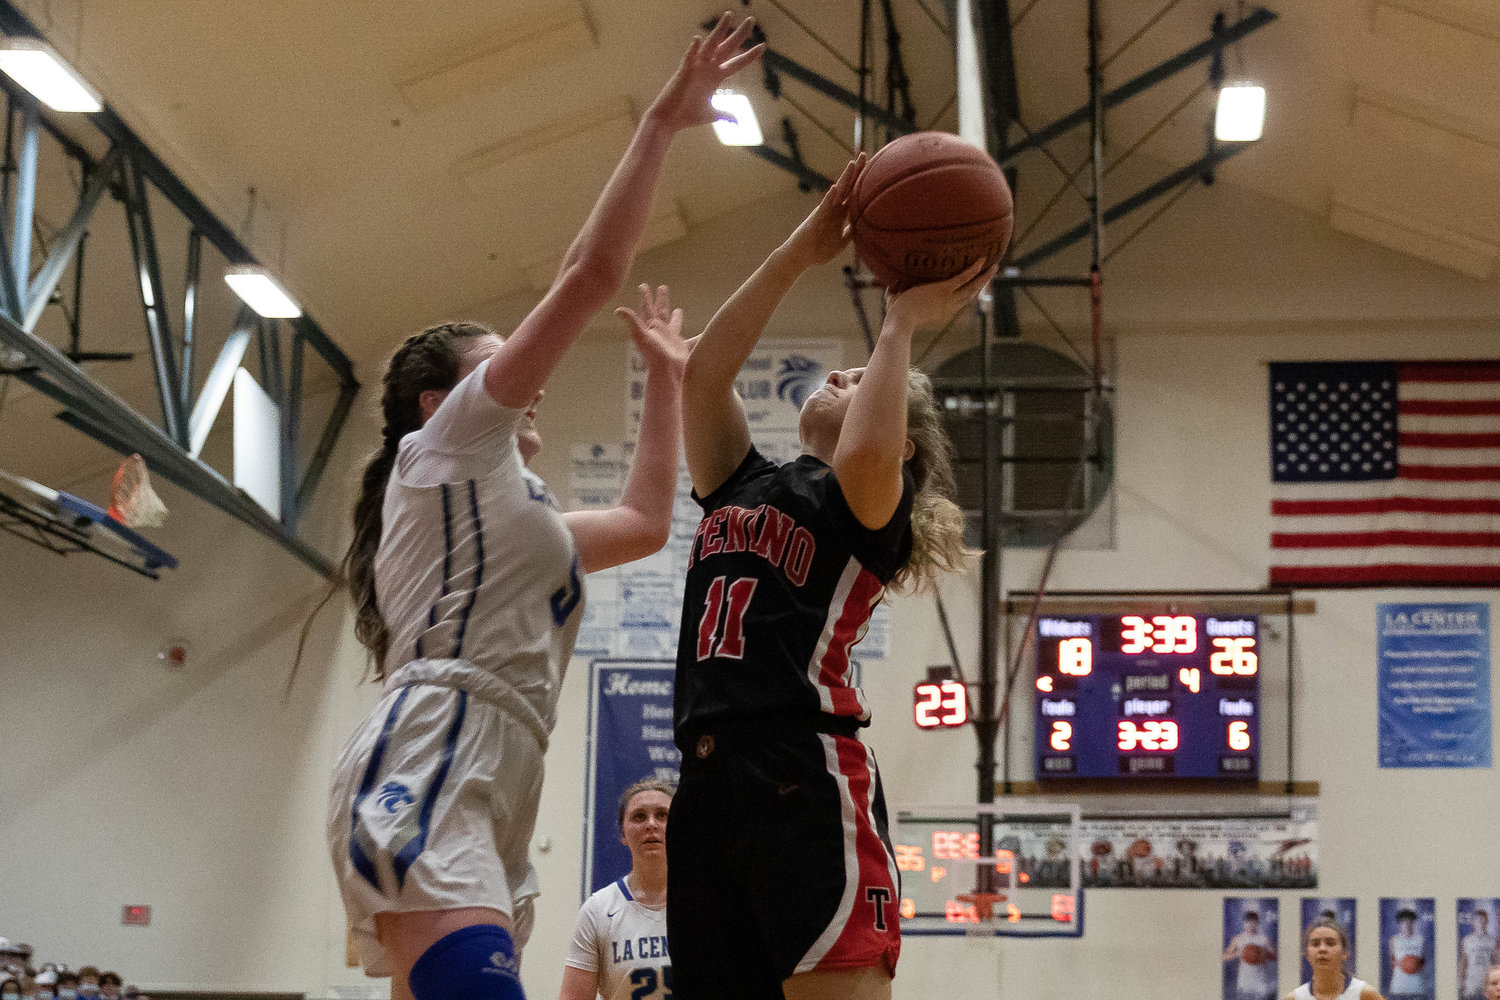 Tenino guard Megan Letts shoots a layup against La Center in the 1A District IV semifinals Feb. 15.